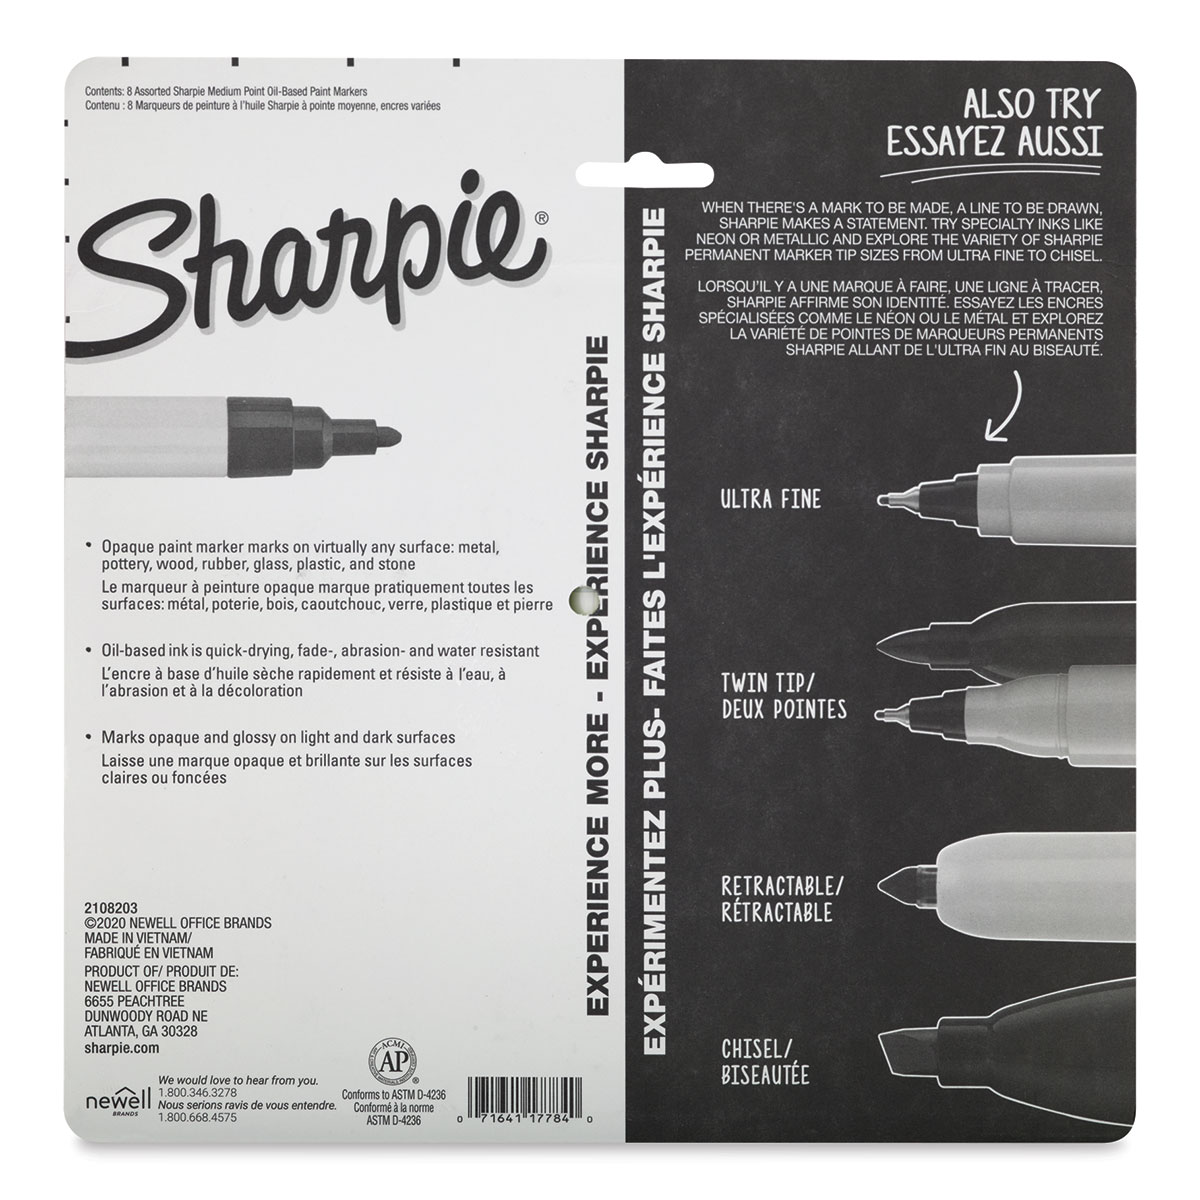 Sharpie Oil Based Paint Markers Set of 5 Fine Point 37371 Knockout Crafts  for sale online